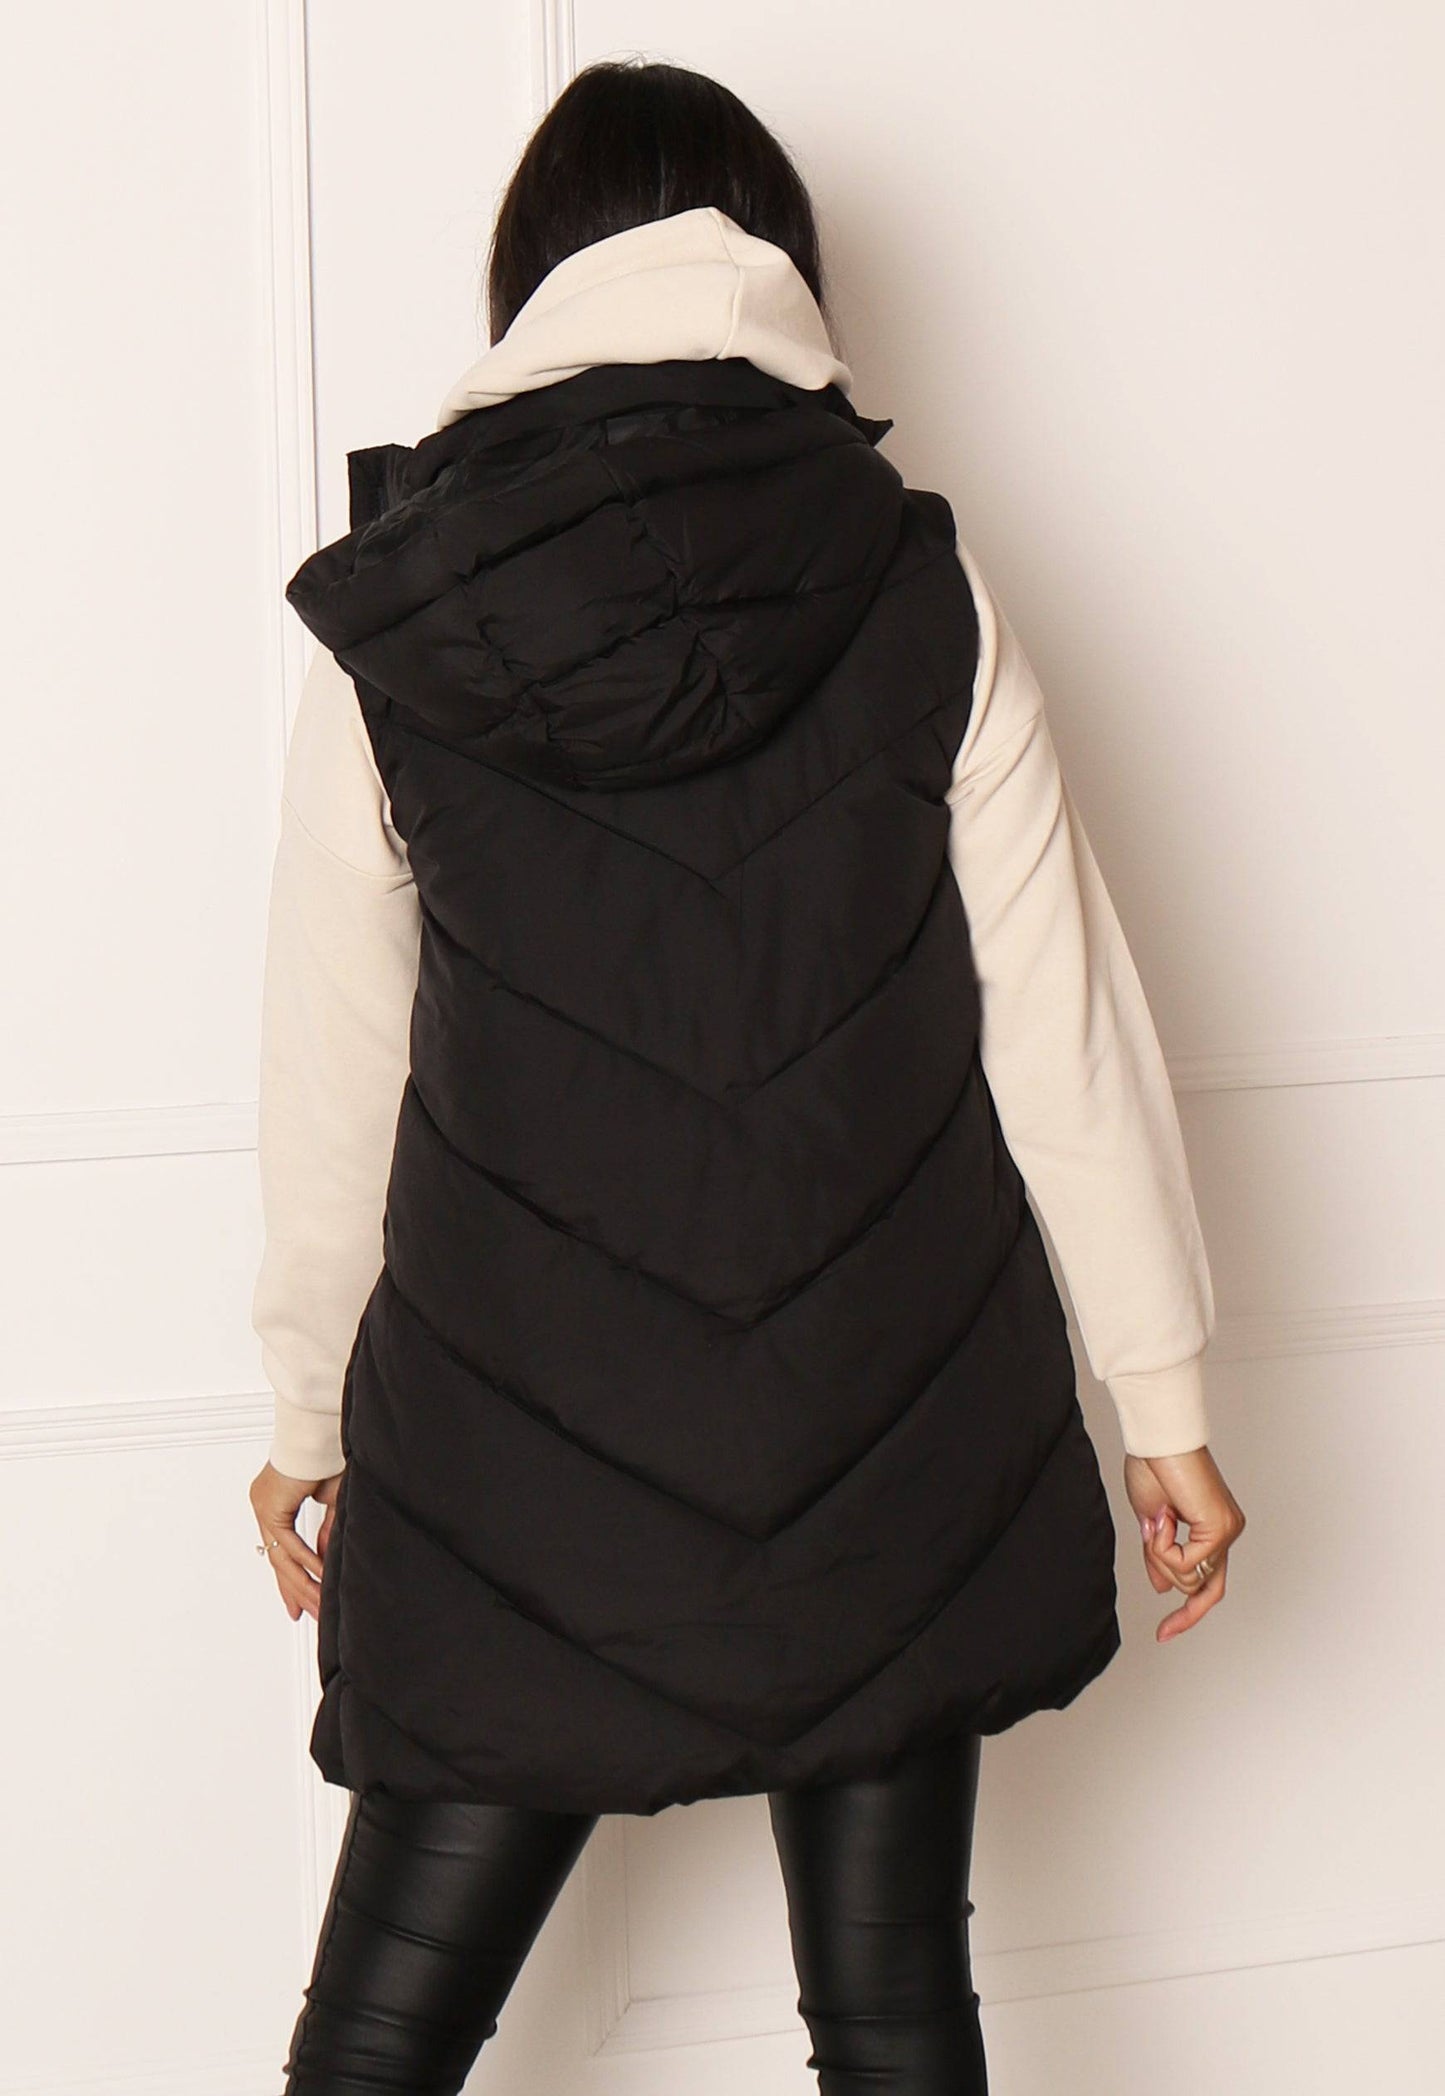 JDY Skylar Chevron Quilted Puffer Gilet with Hood in Black - One Nation Clothing